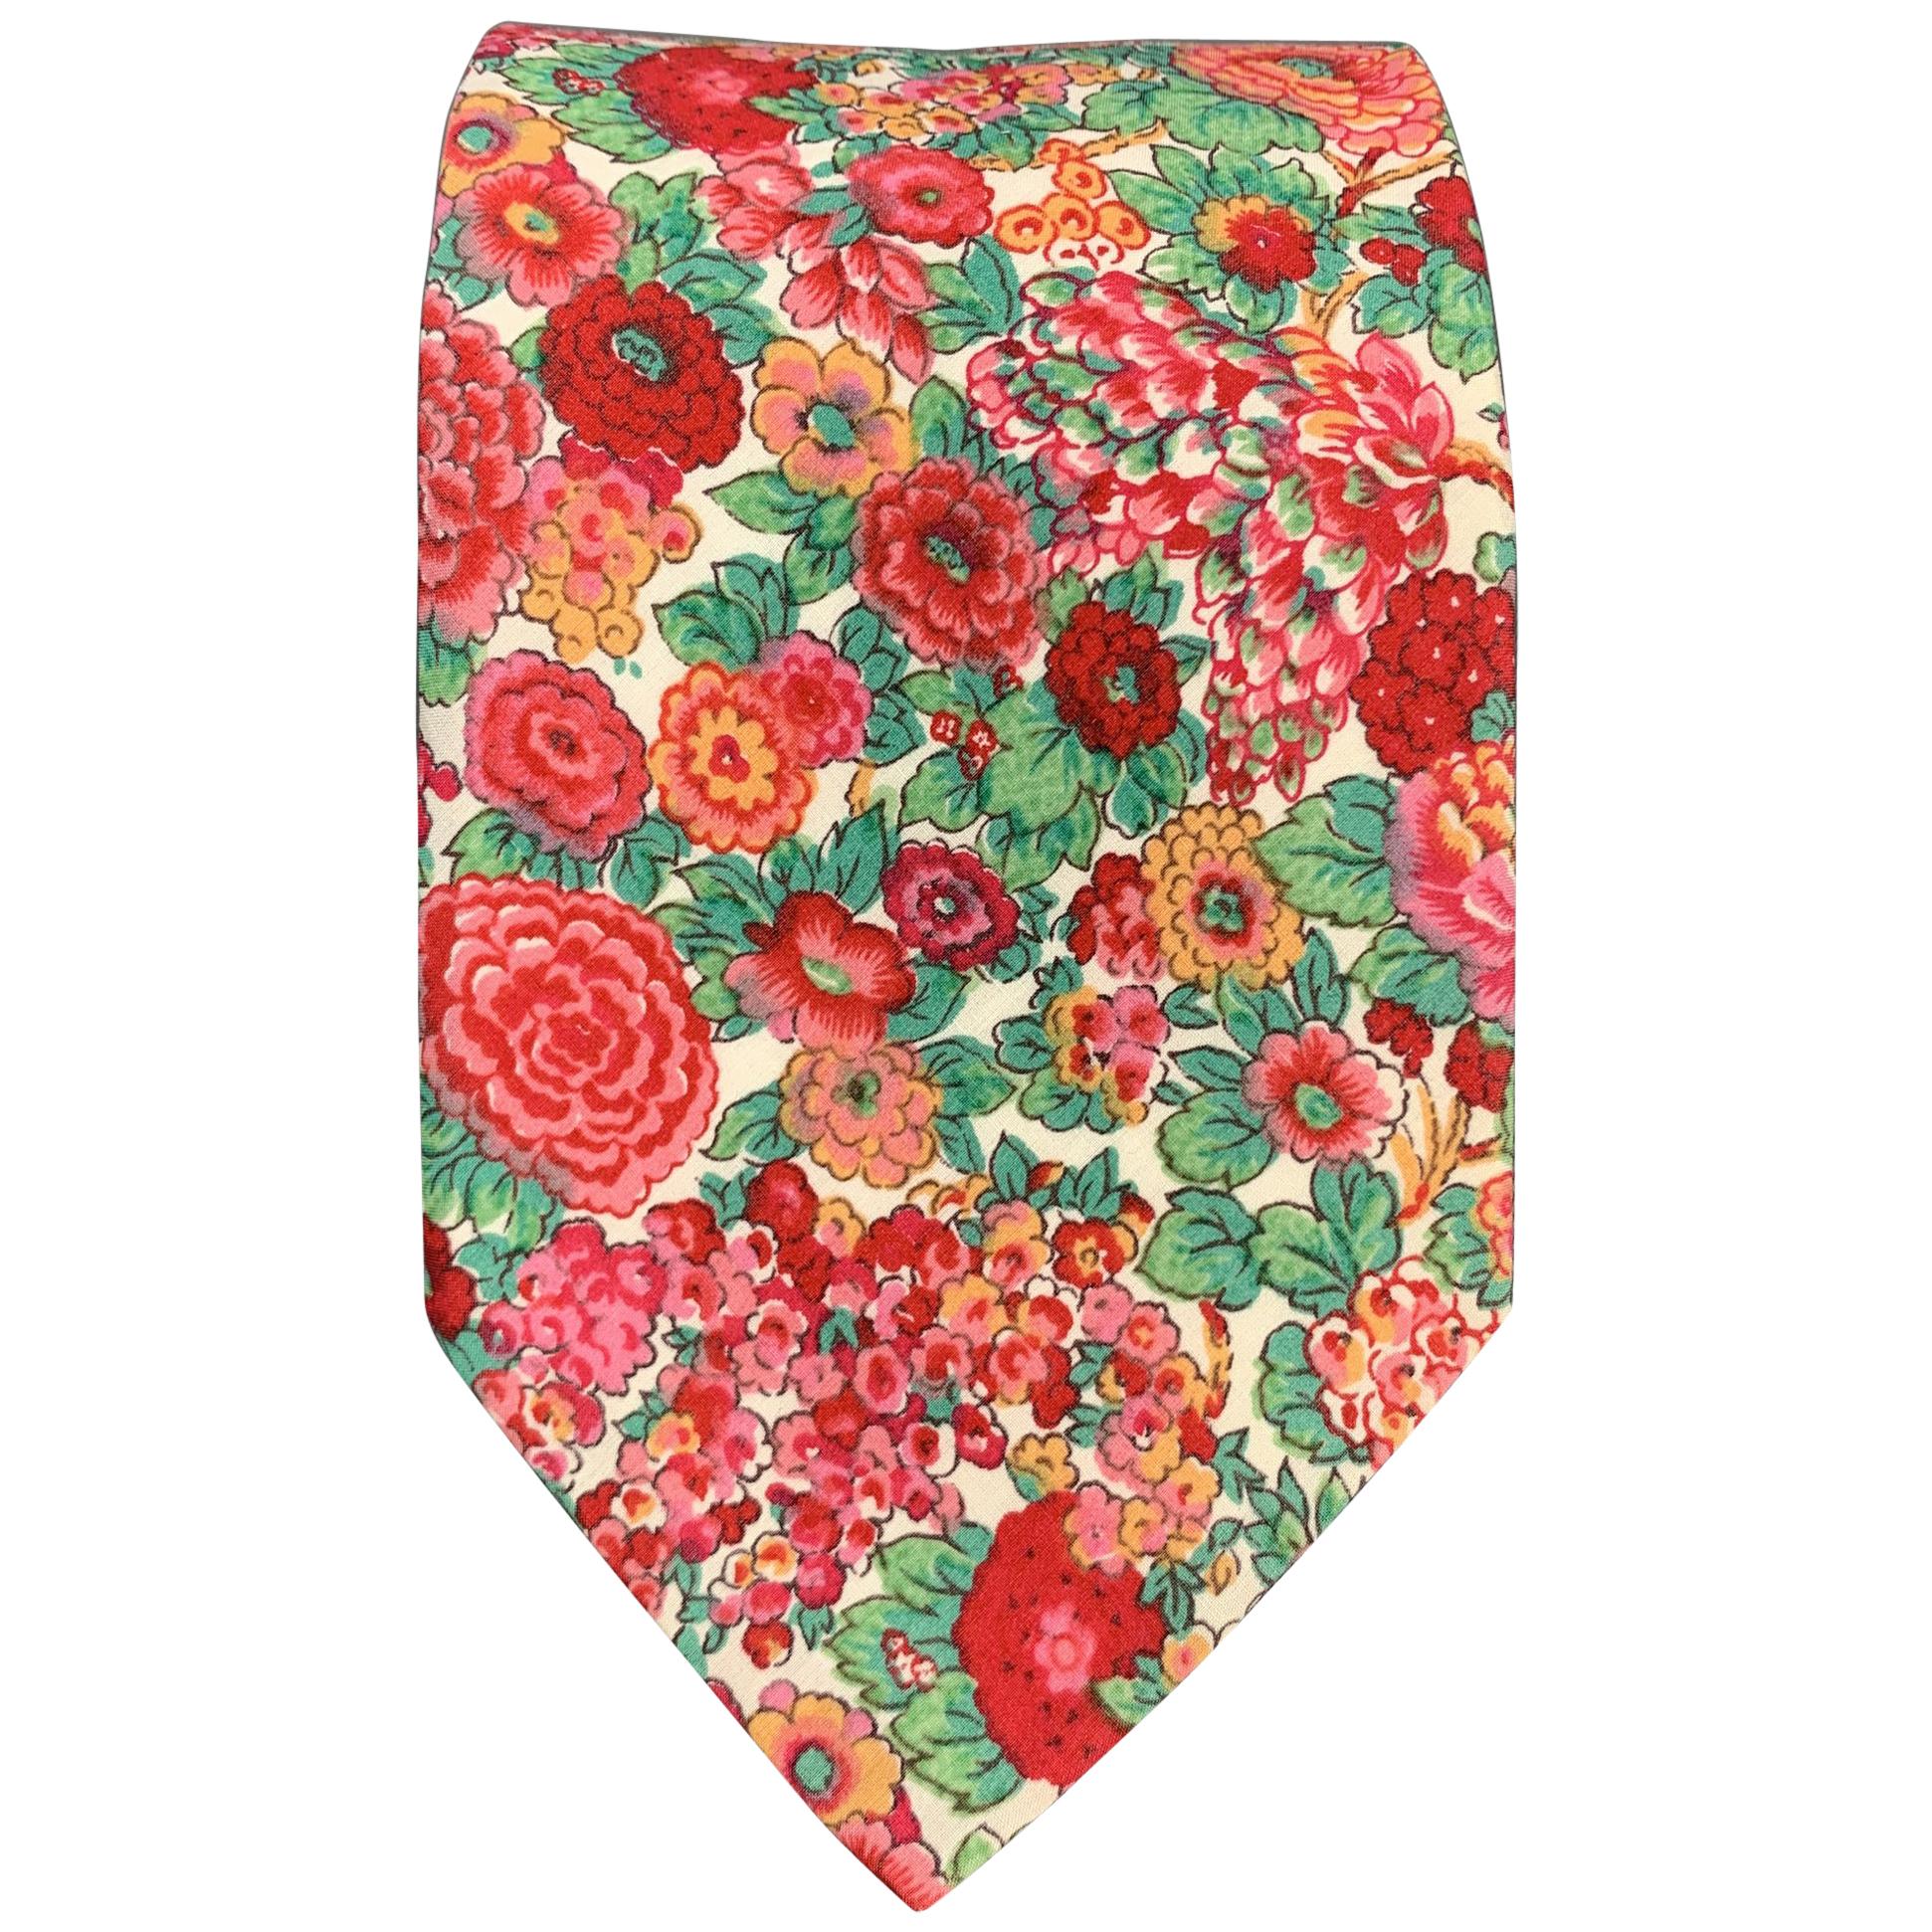 LIBERTY OF LONDON Red & Green Floral Print Cotton Tie